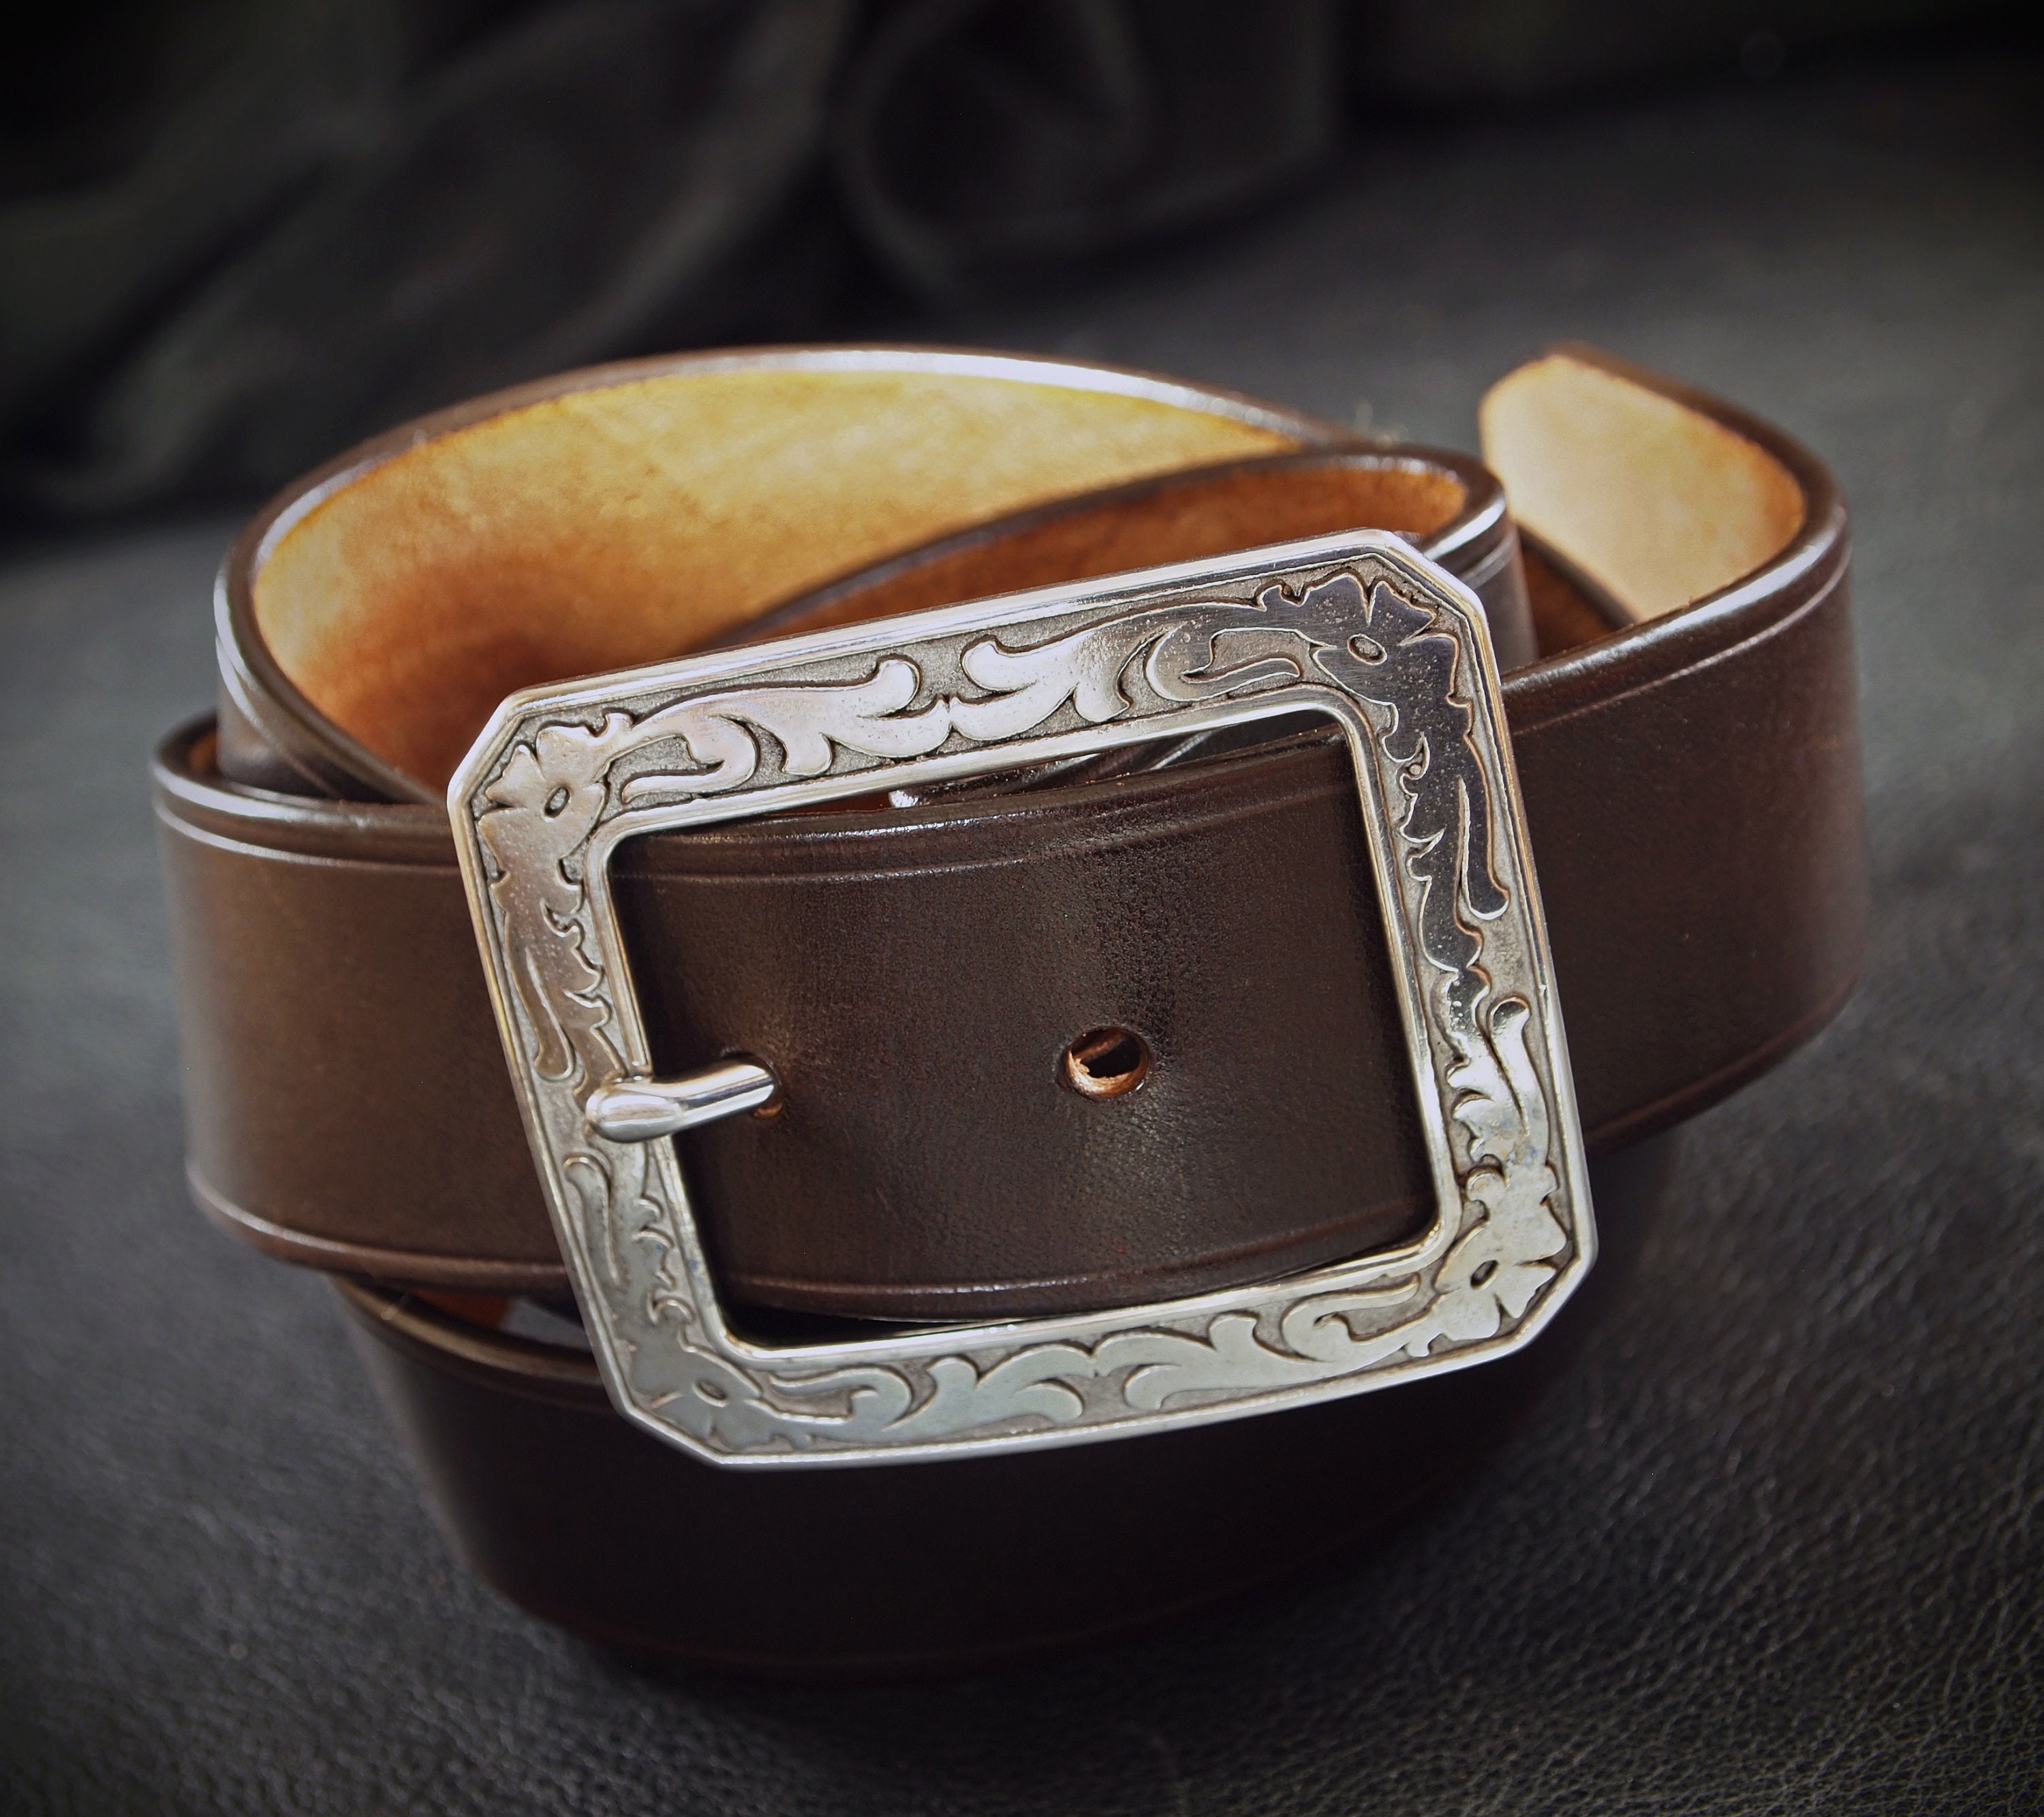 Rich brown Leather belt with Stainless steel buckle: made in New York